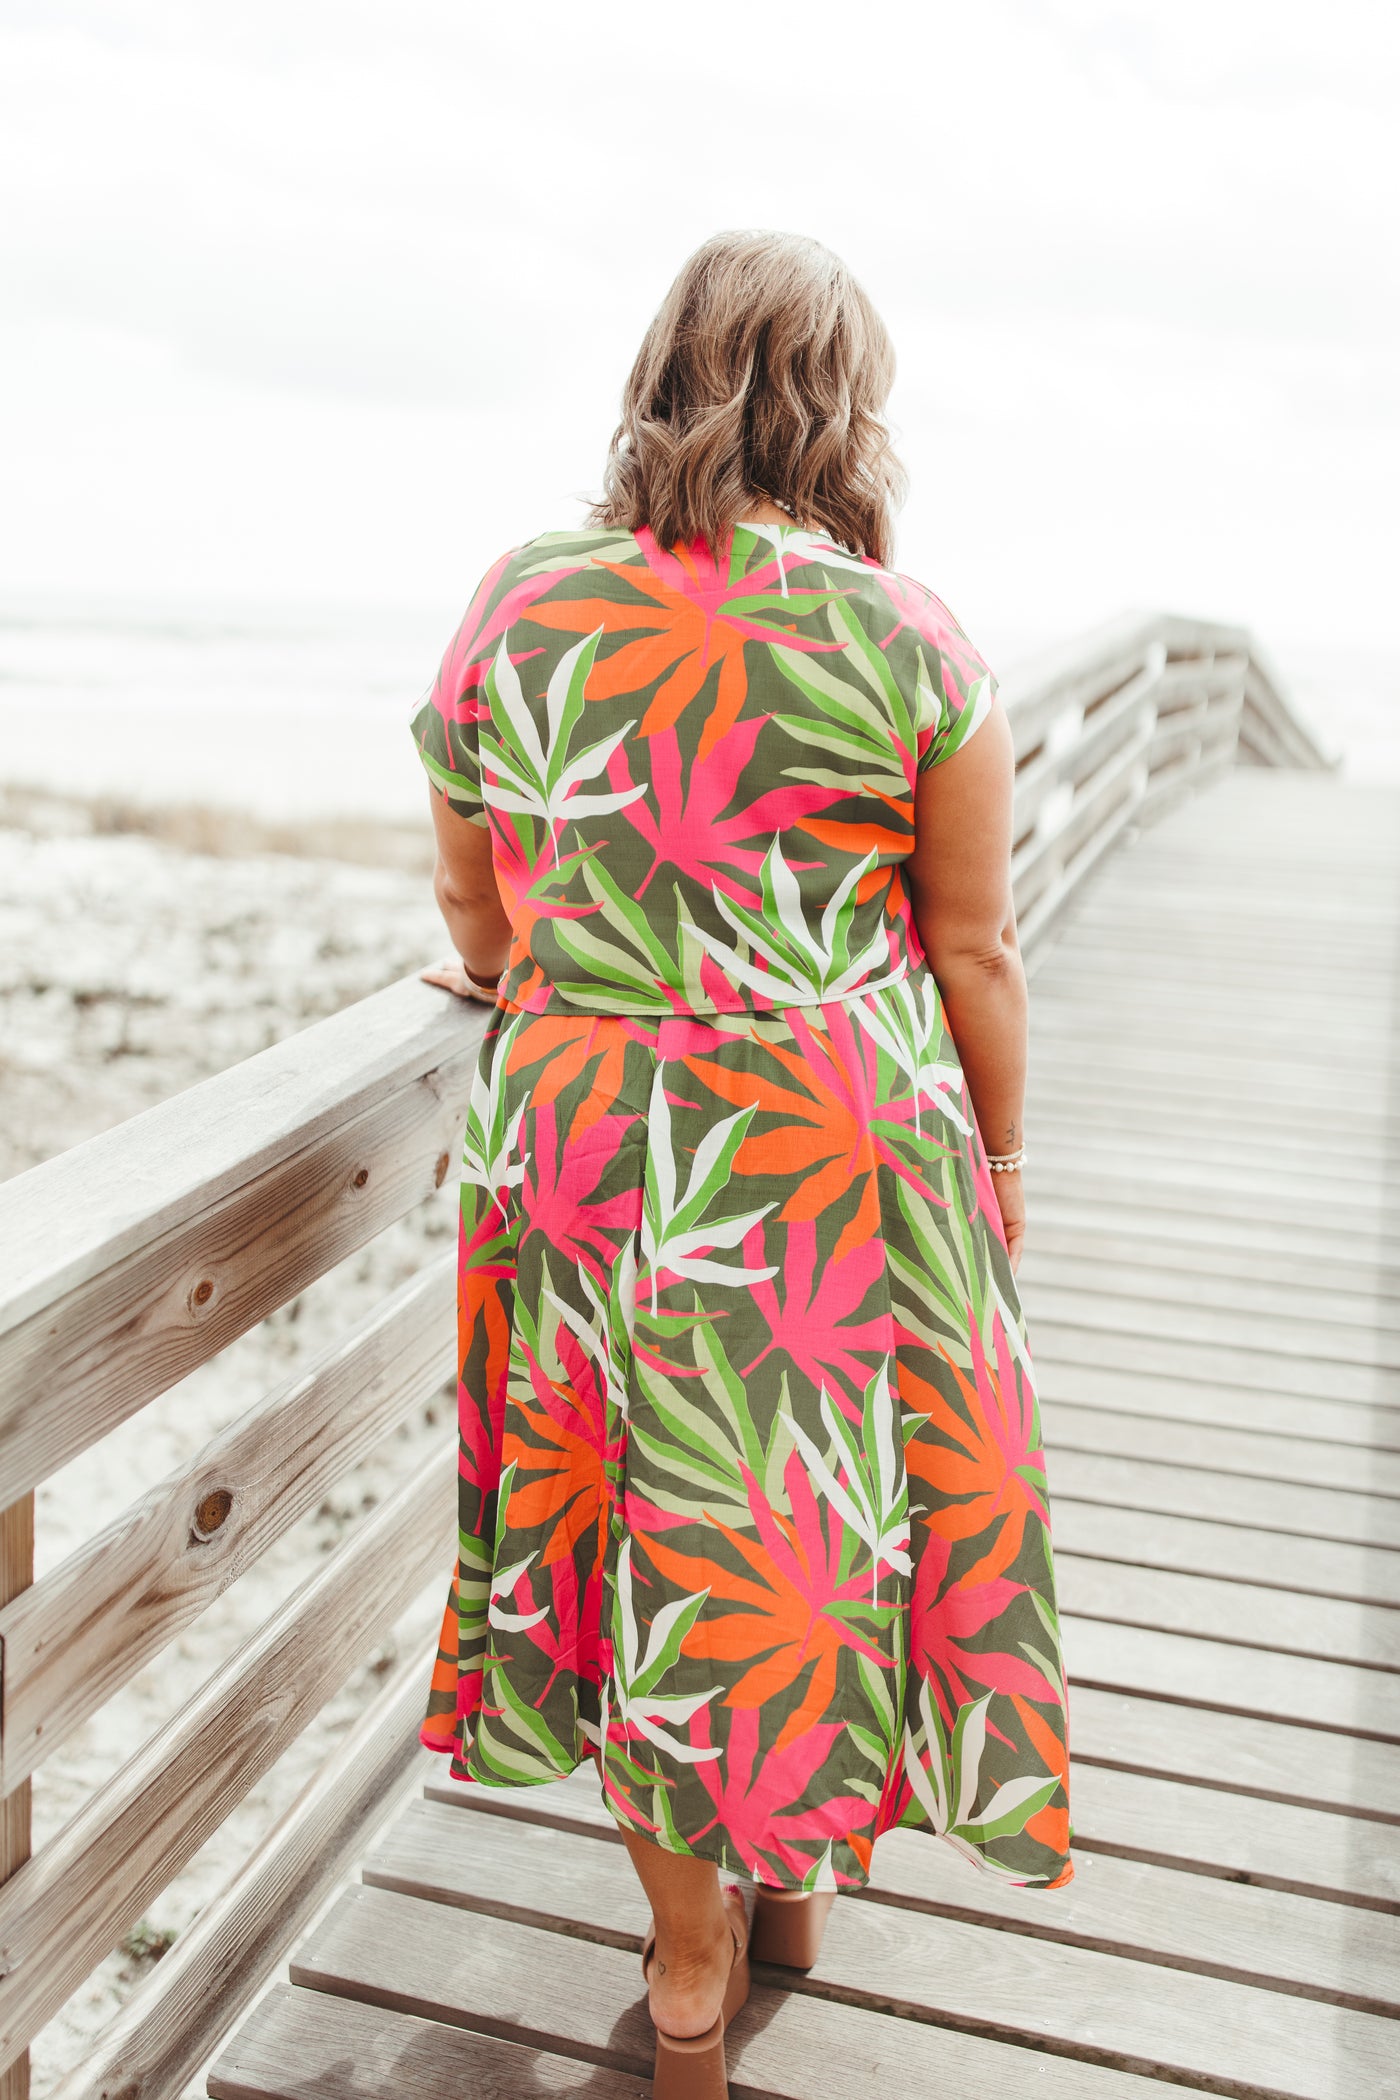 Green Multi Tropical Top and Skirt Set